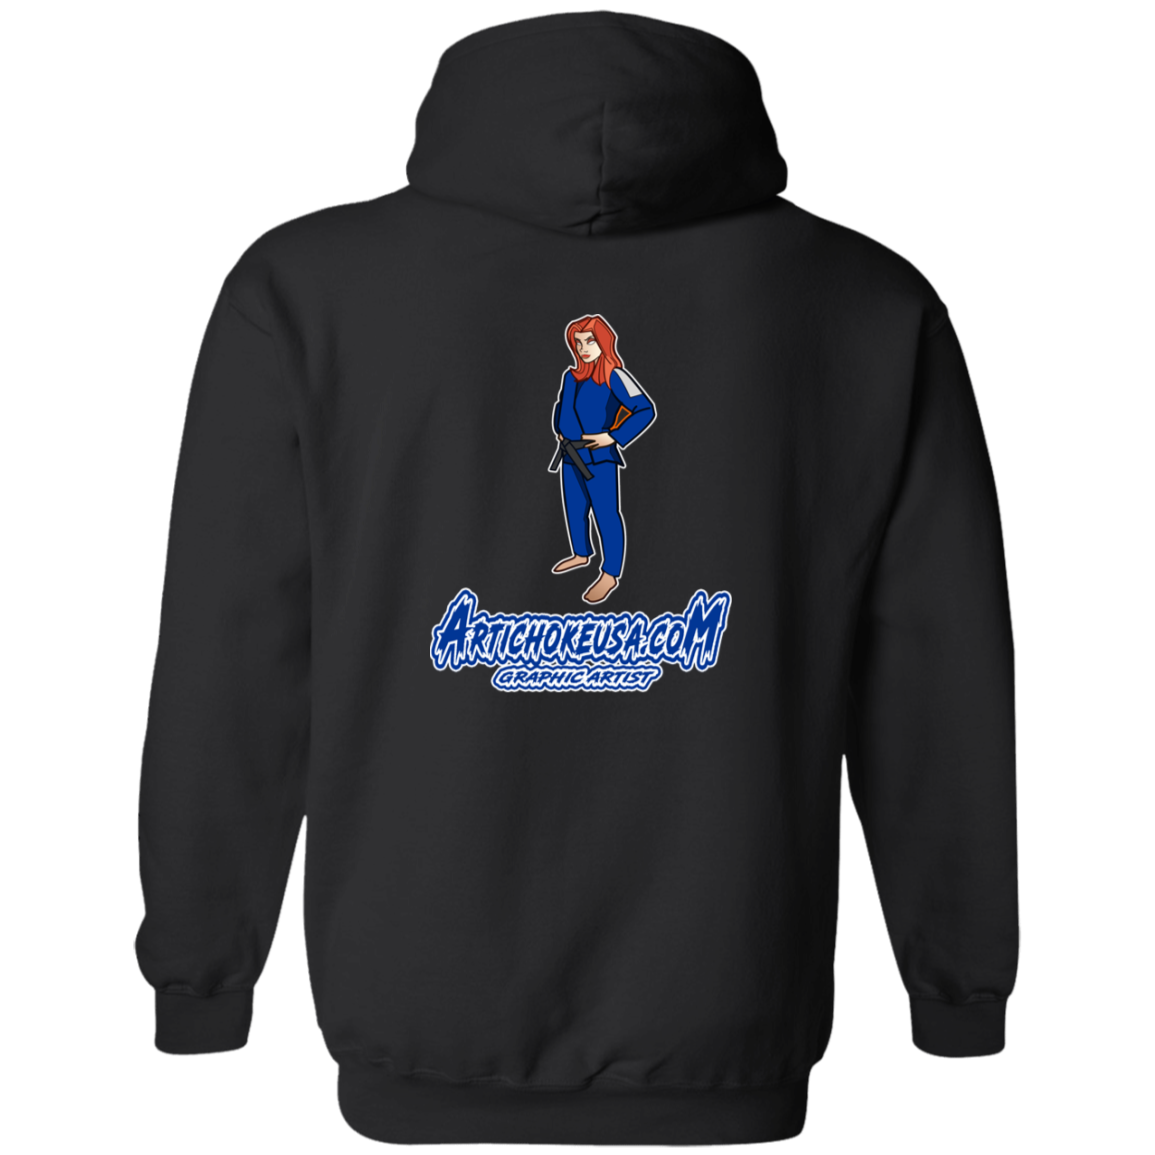 ArtichokeUSA Character and Font design. Let's Create Your Own Team Design Today. Amber. Zip Up Hooded Sweatshirt